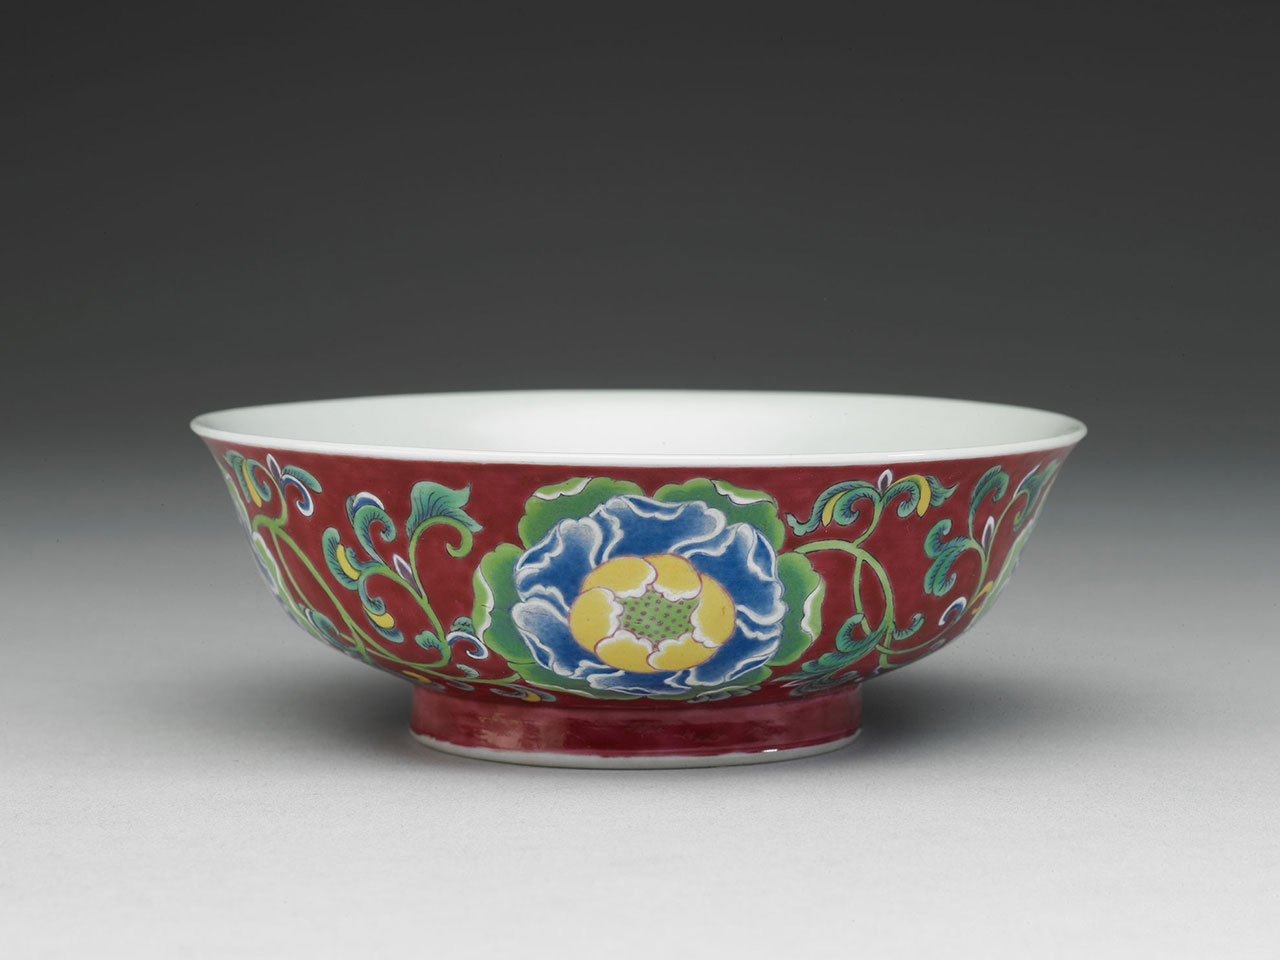 Bowl with peonies on a red ground in painted enamels